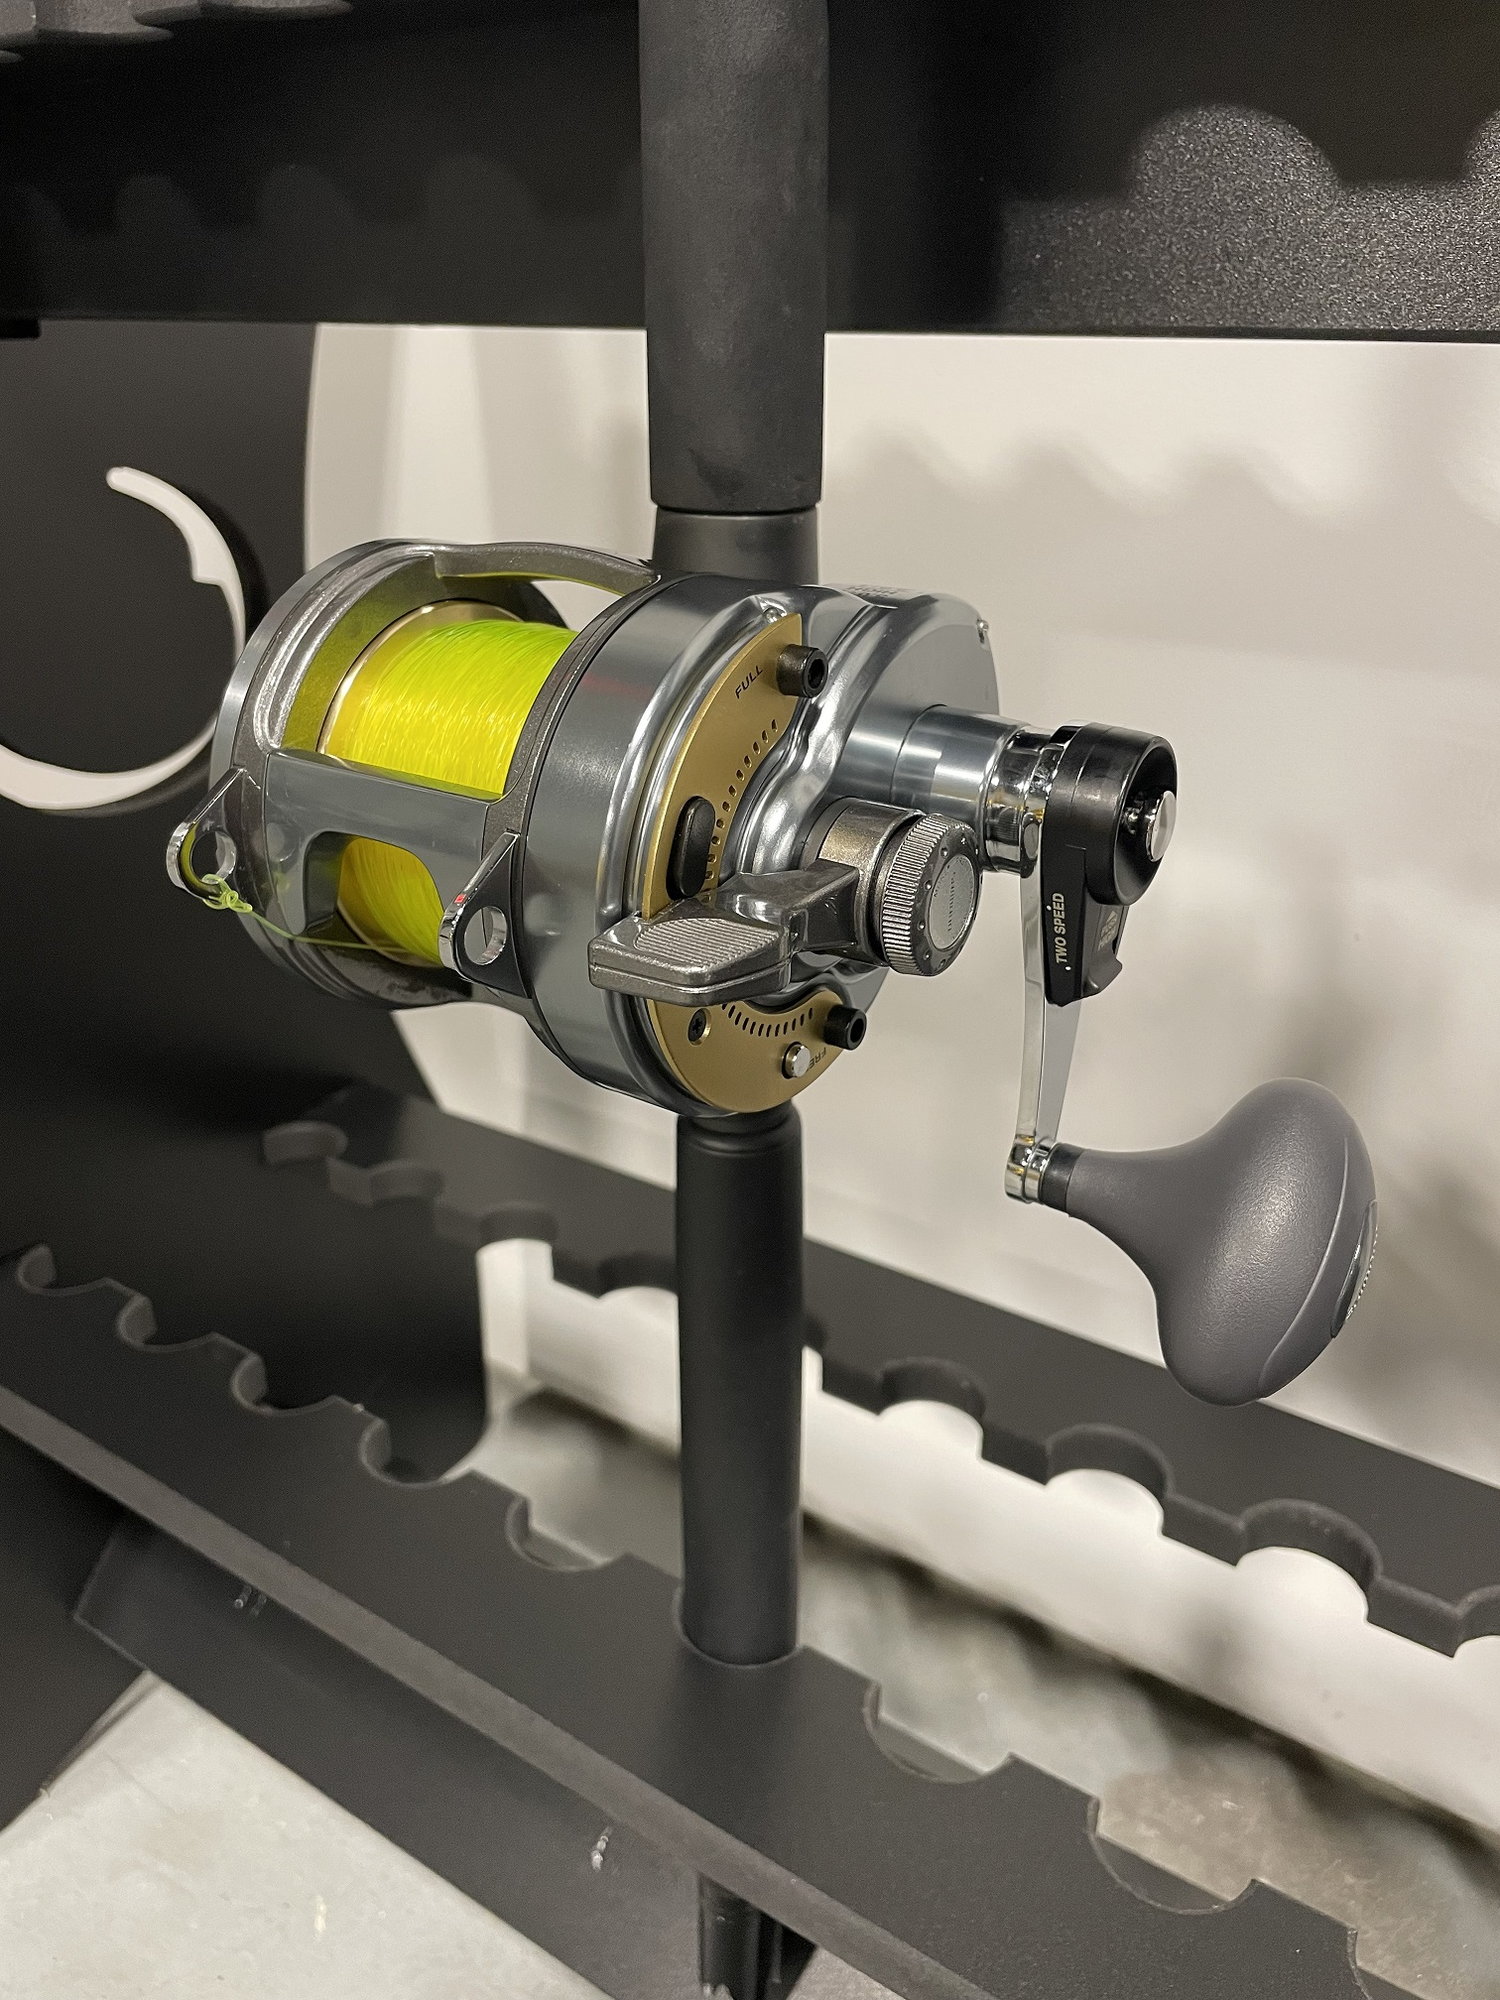 Let's see some personal spooling stations - The Hull Truth - Boating and  Fishing Forum